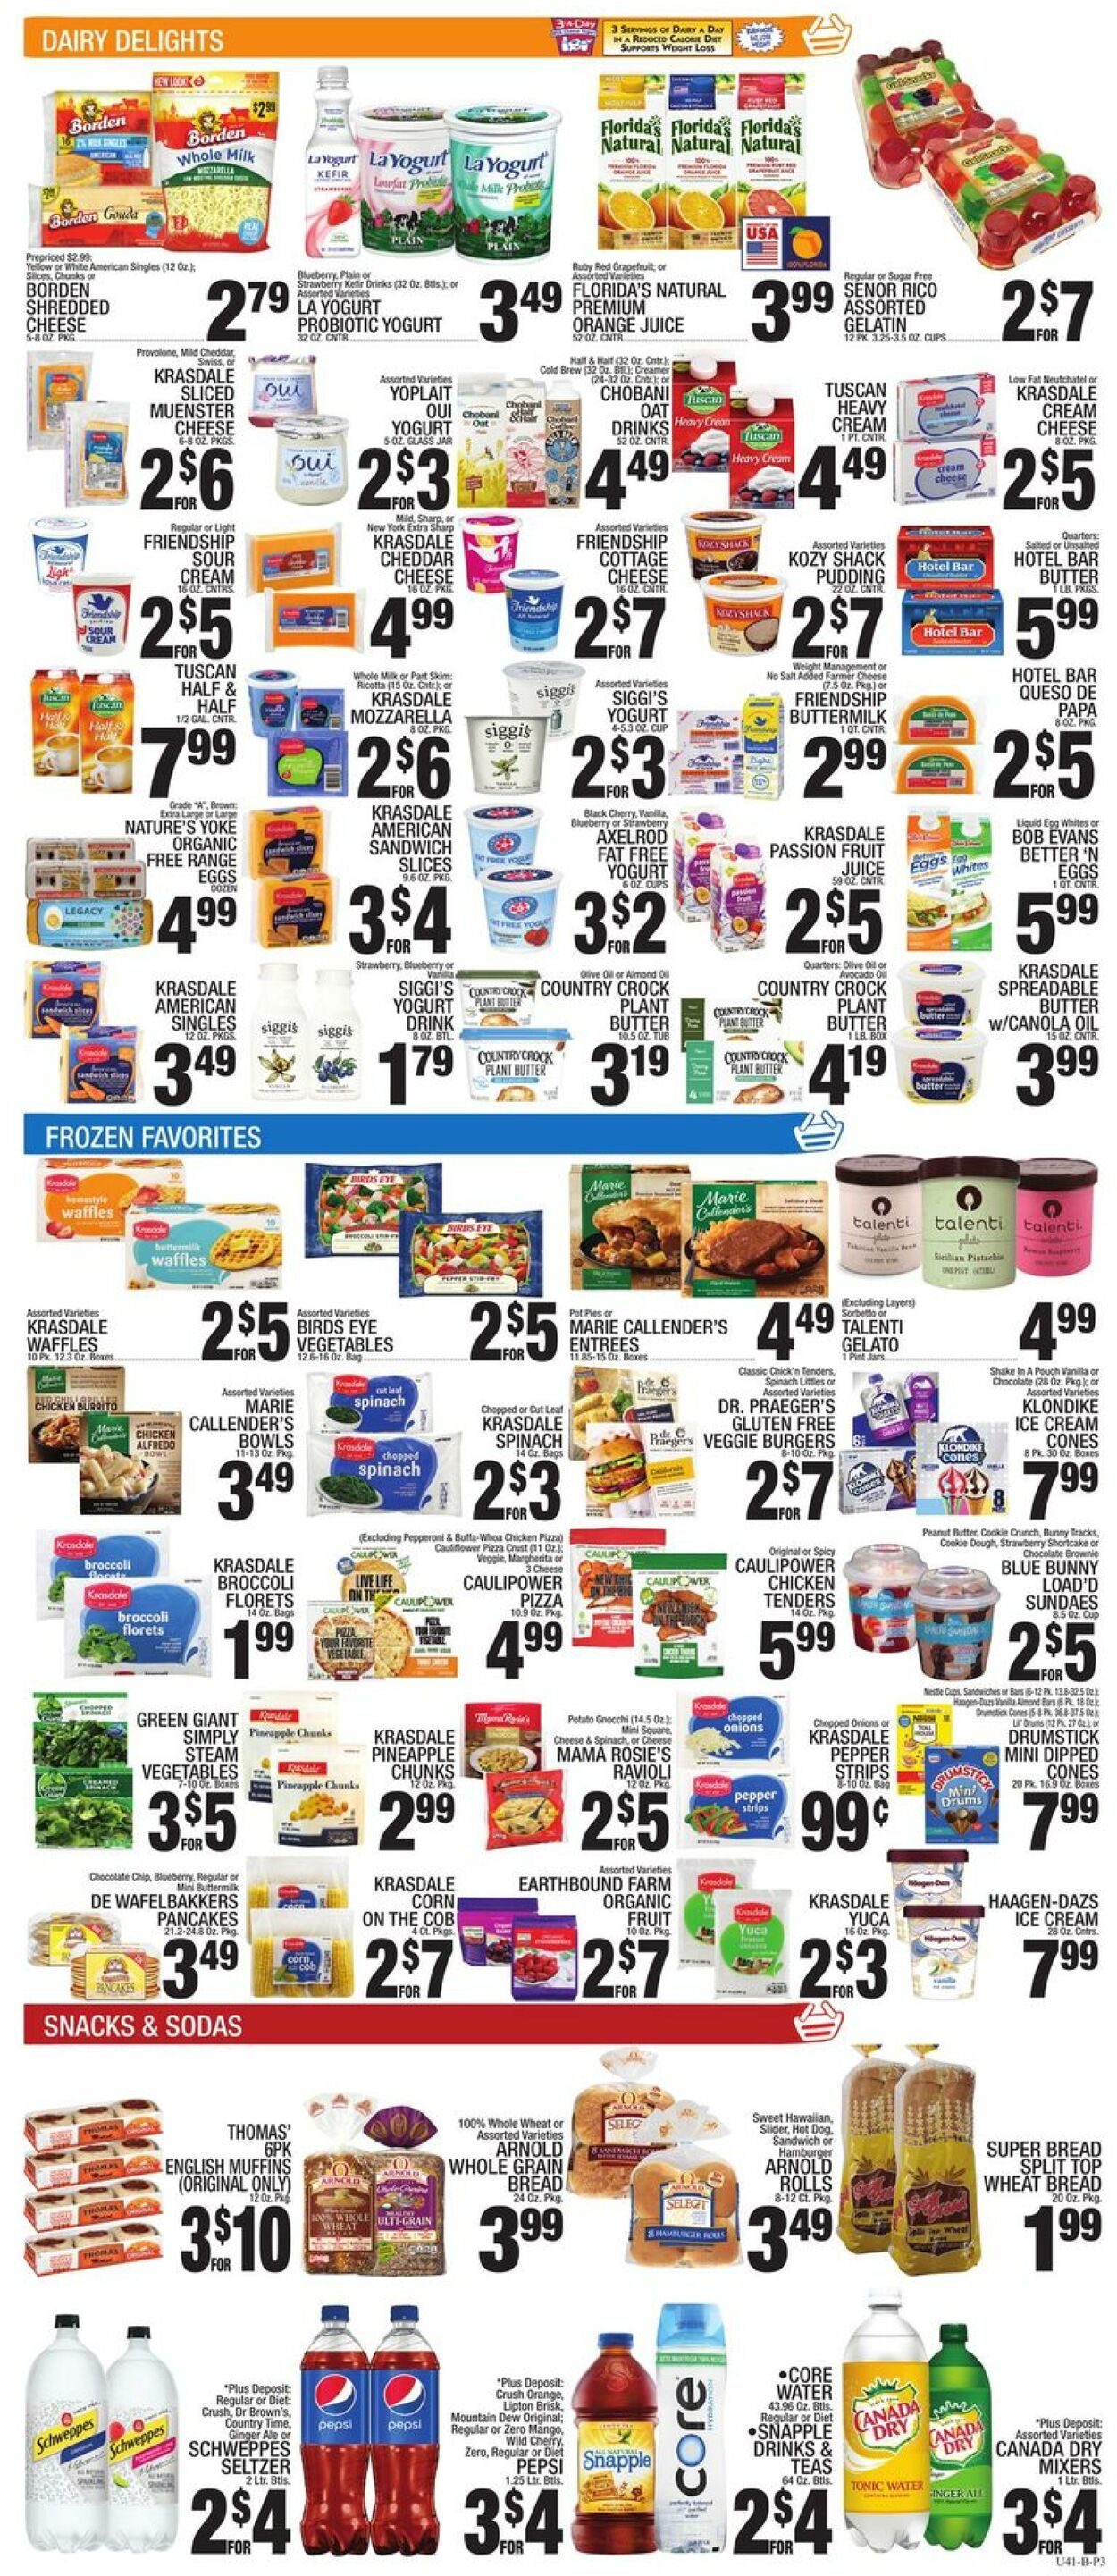 Weekly ad CTown 05/13/2022 - 05/19/2022